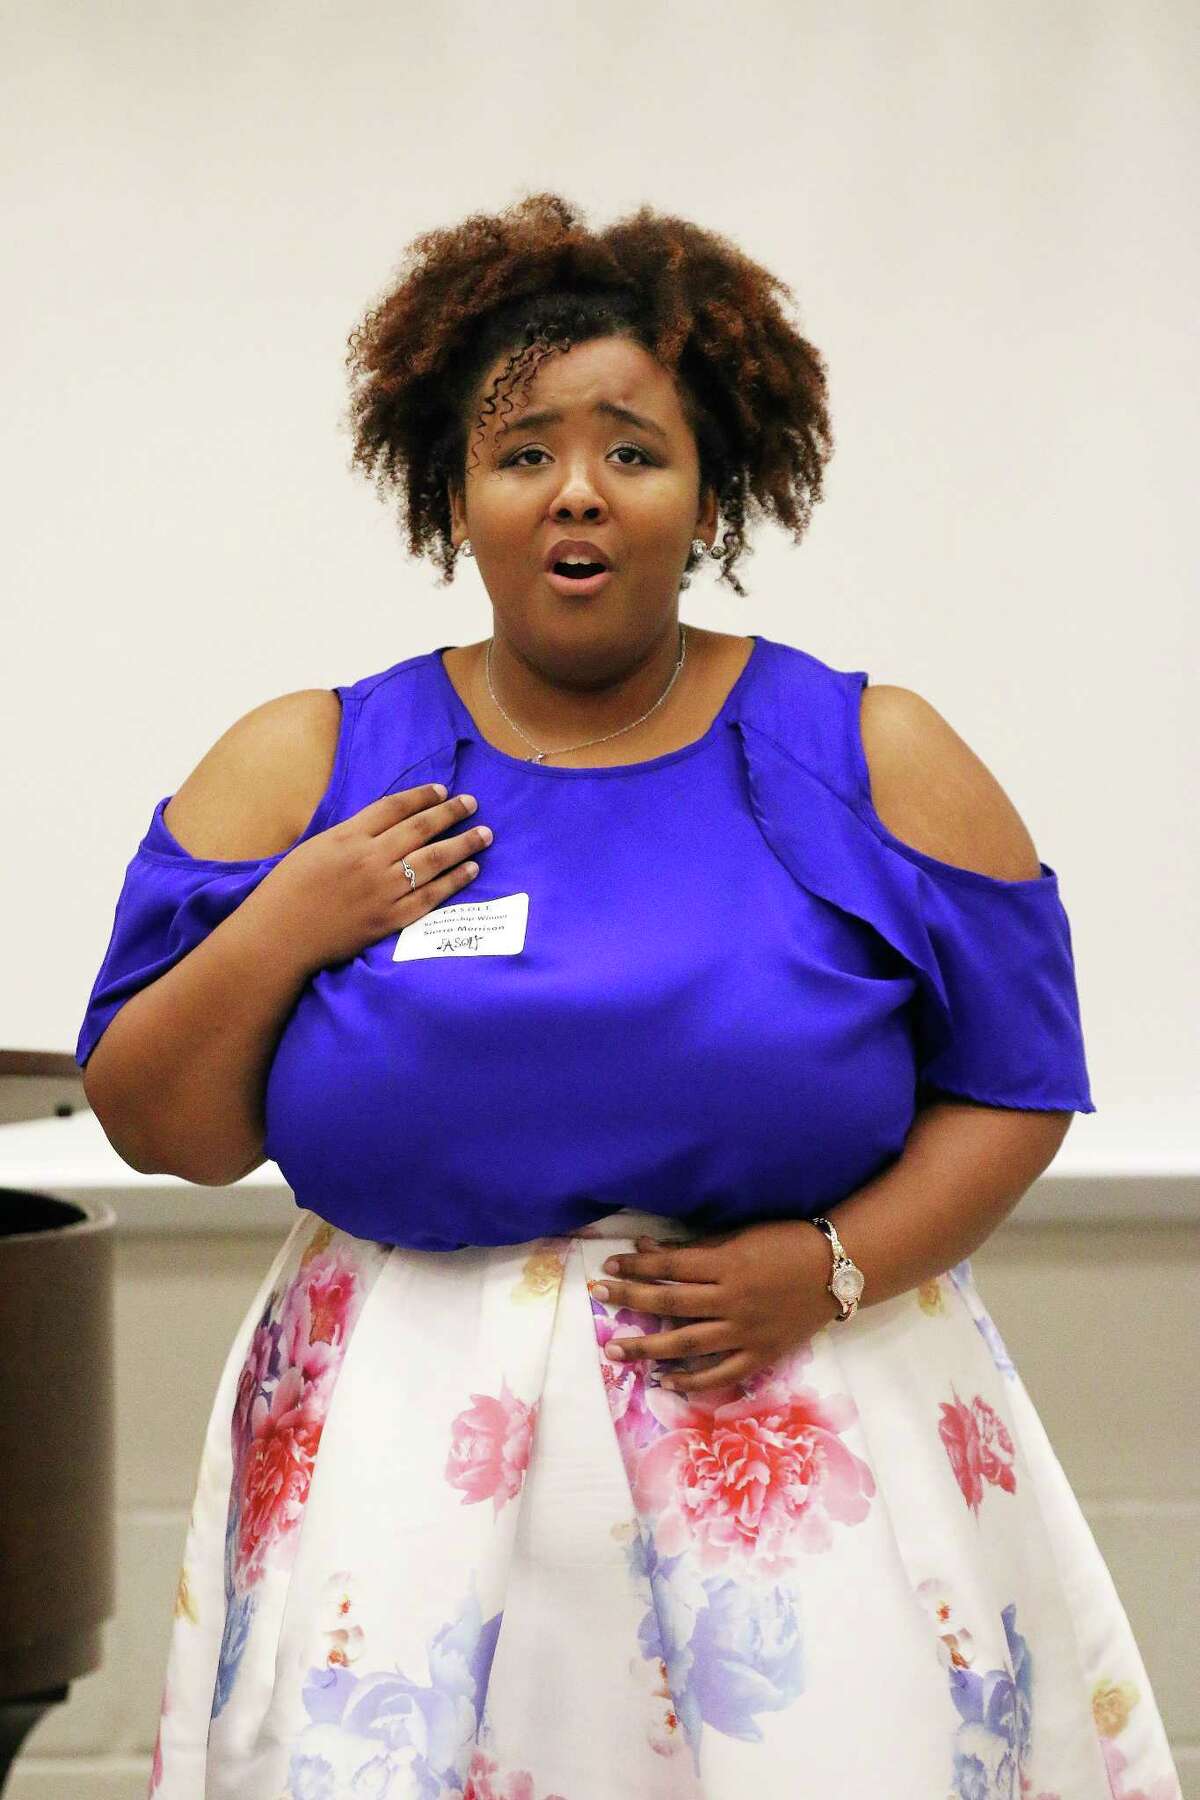 Sierra Morrison sang the selection ?“Tristes Apprets?” by J. P. Rameau at the vocal performance on Saturday in the Liberty High School choir room. She has been the recipient of a scholarship from FASOLT and is a vocal performance major at University of North Texas.